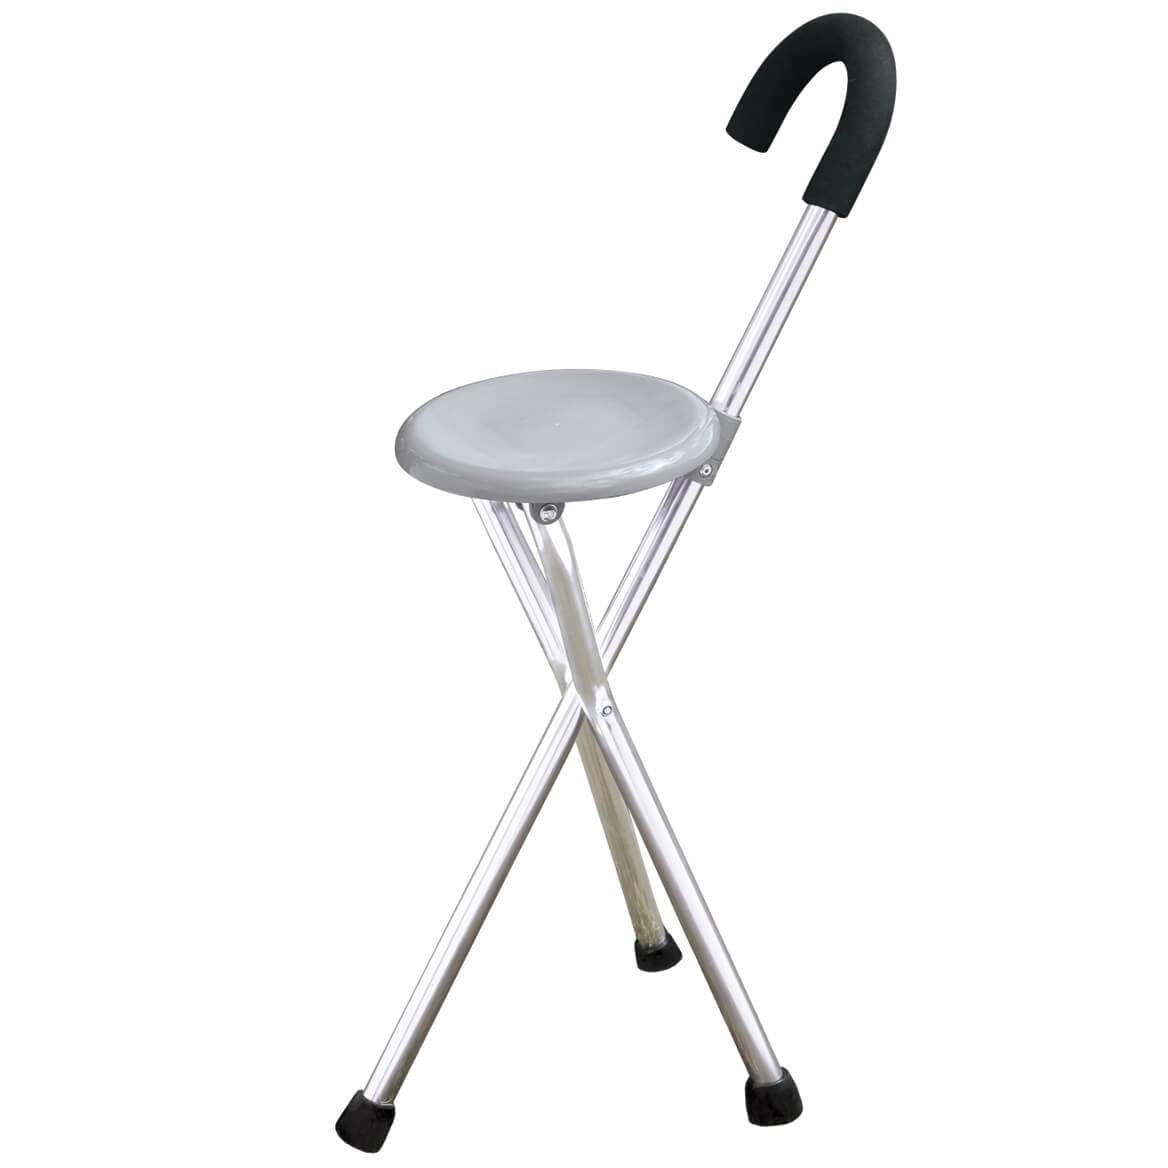 2 In 1 Deluxe Folding Cane Seat